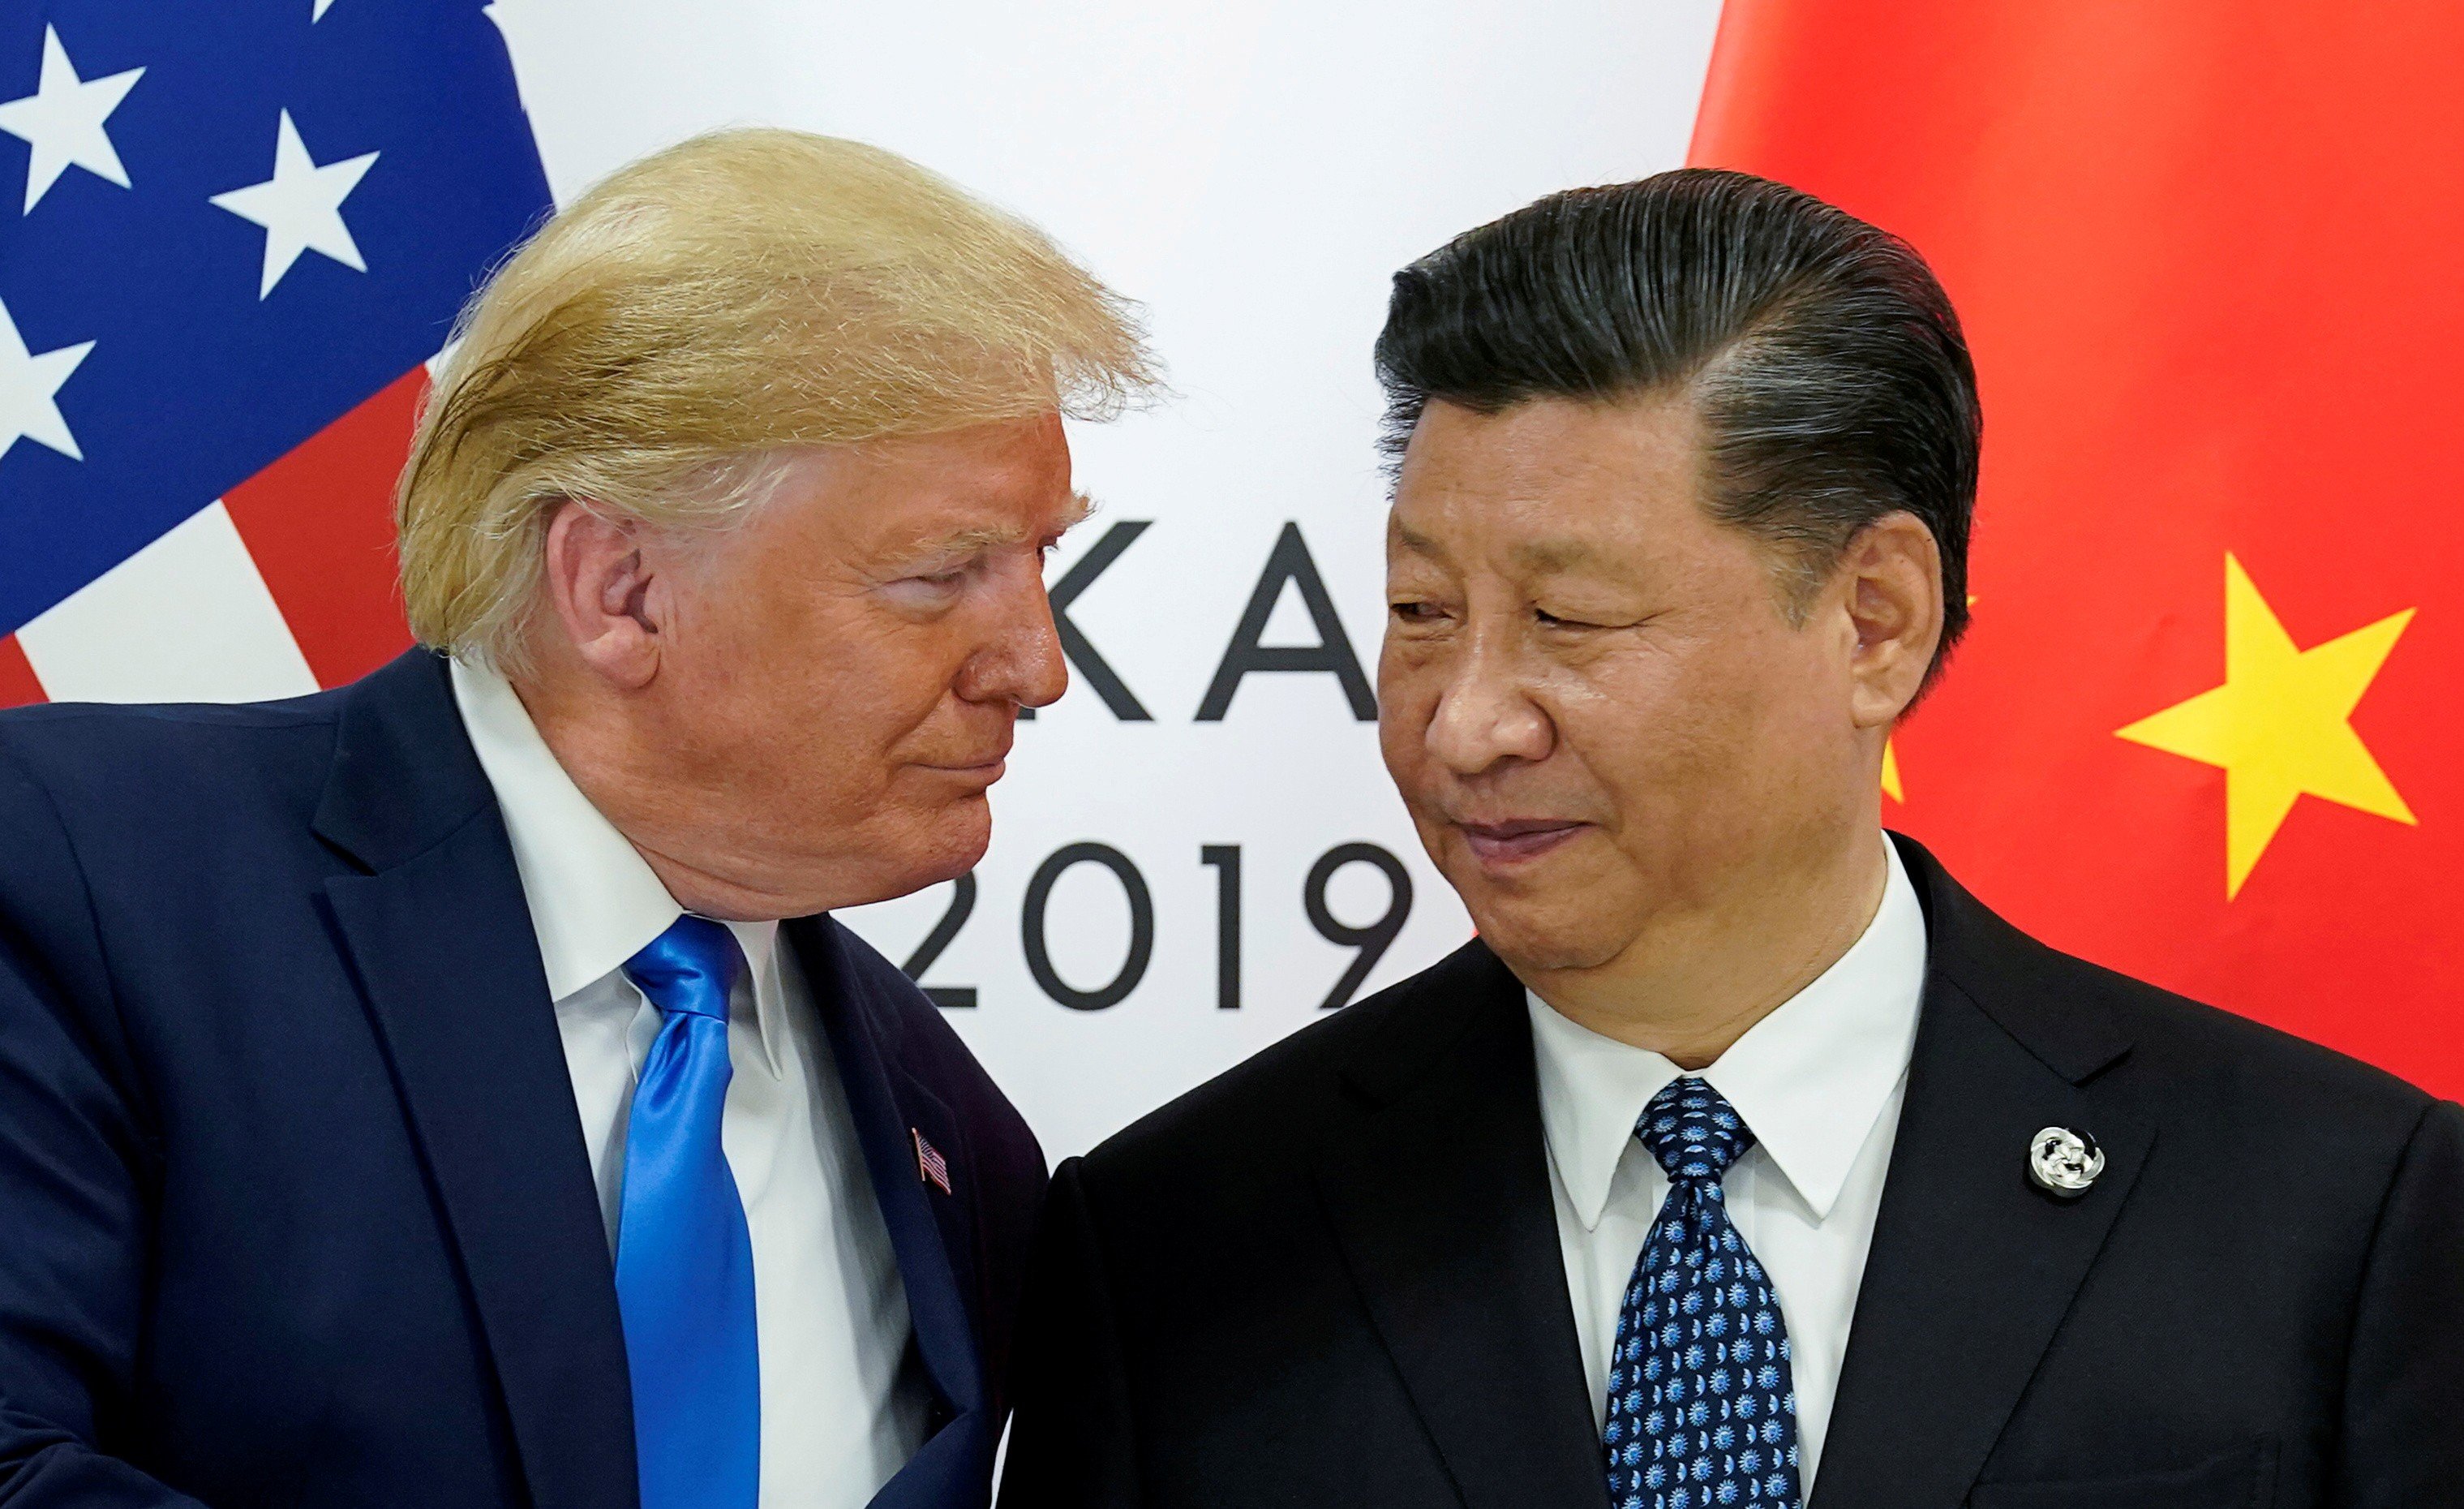 Presidents Donald Trump and Xi Jinping agreed at the G20 summit in Osaka in June to resume trade negotiations but a similar agreement they reached last year failed. Photo: Reuters